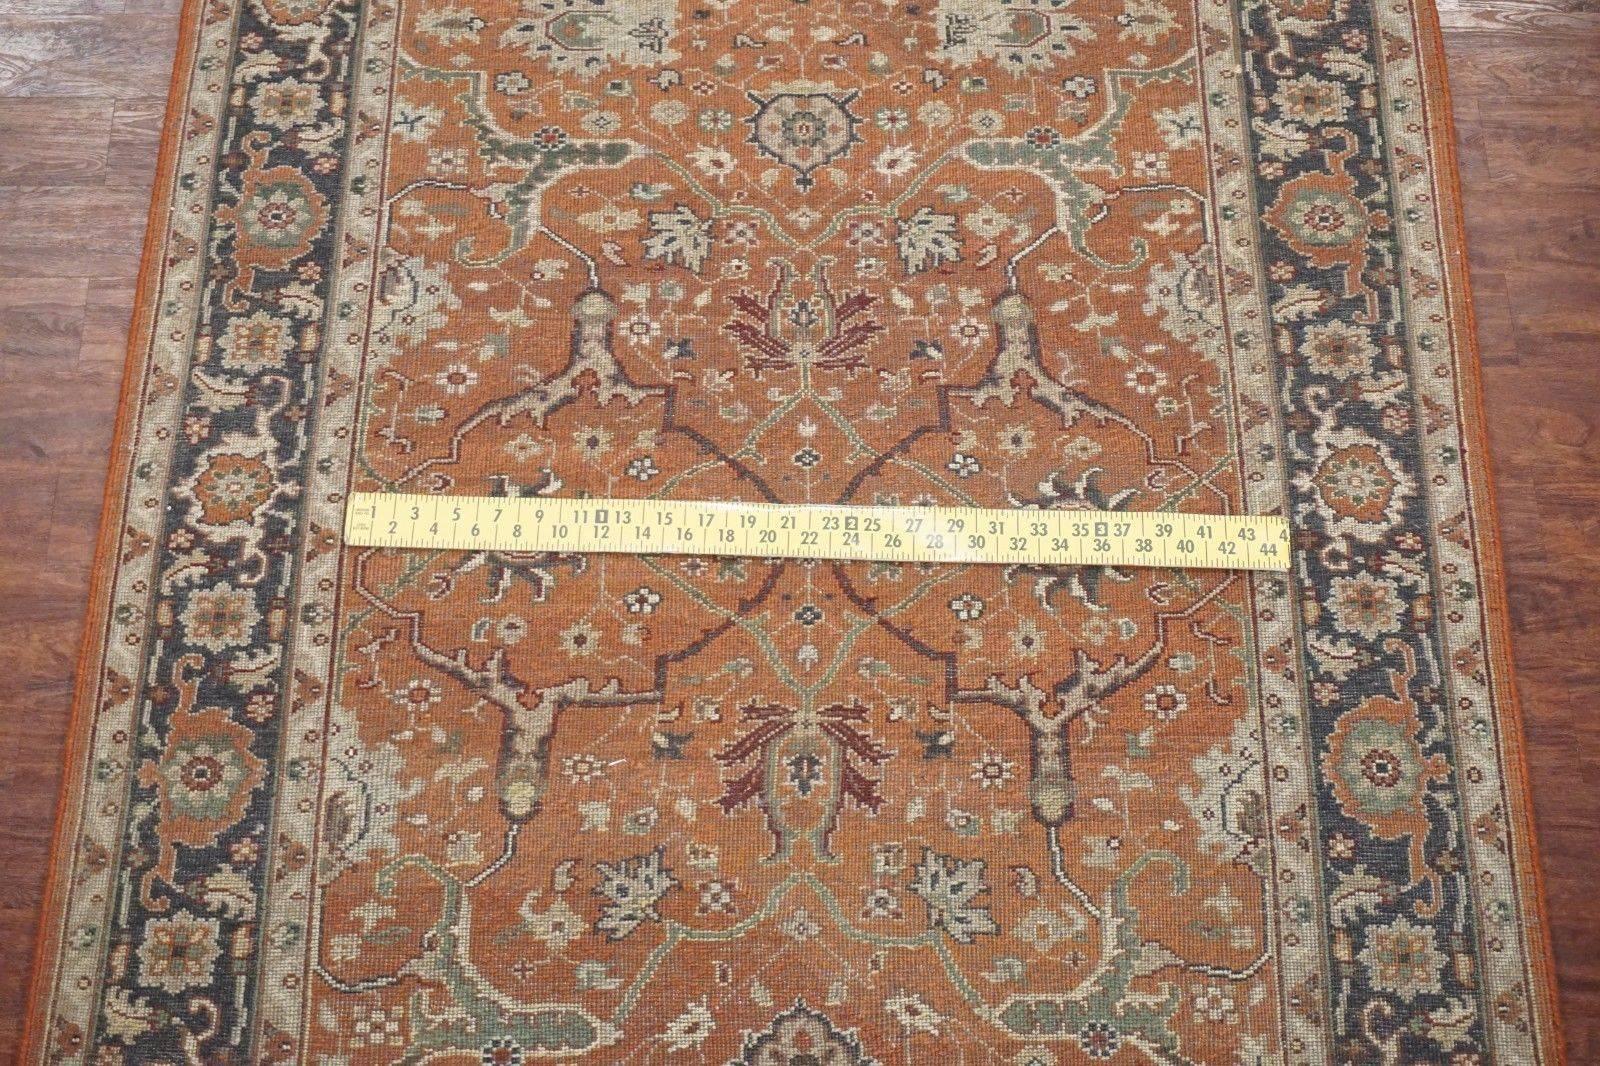 Vegetable Dyed Mahal Style Rug In Excellent Condition For Sale In Northridge, CA